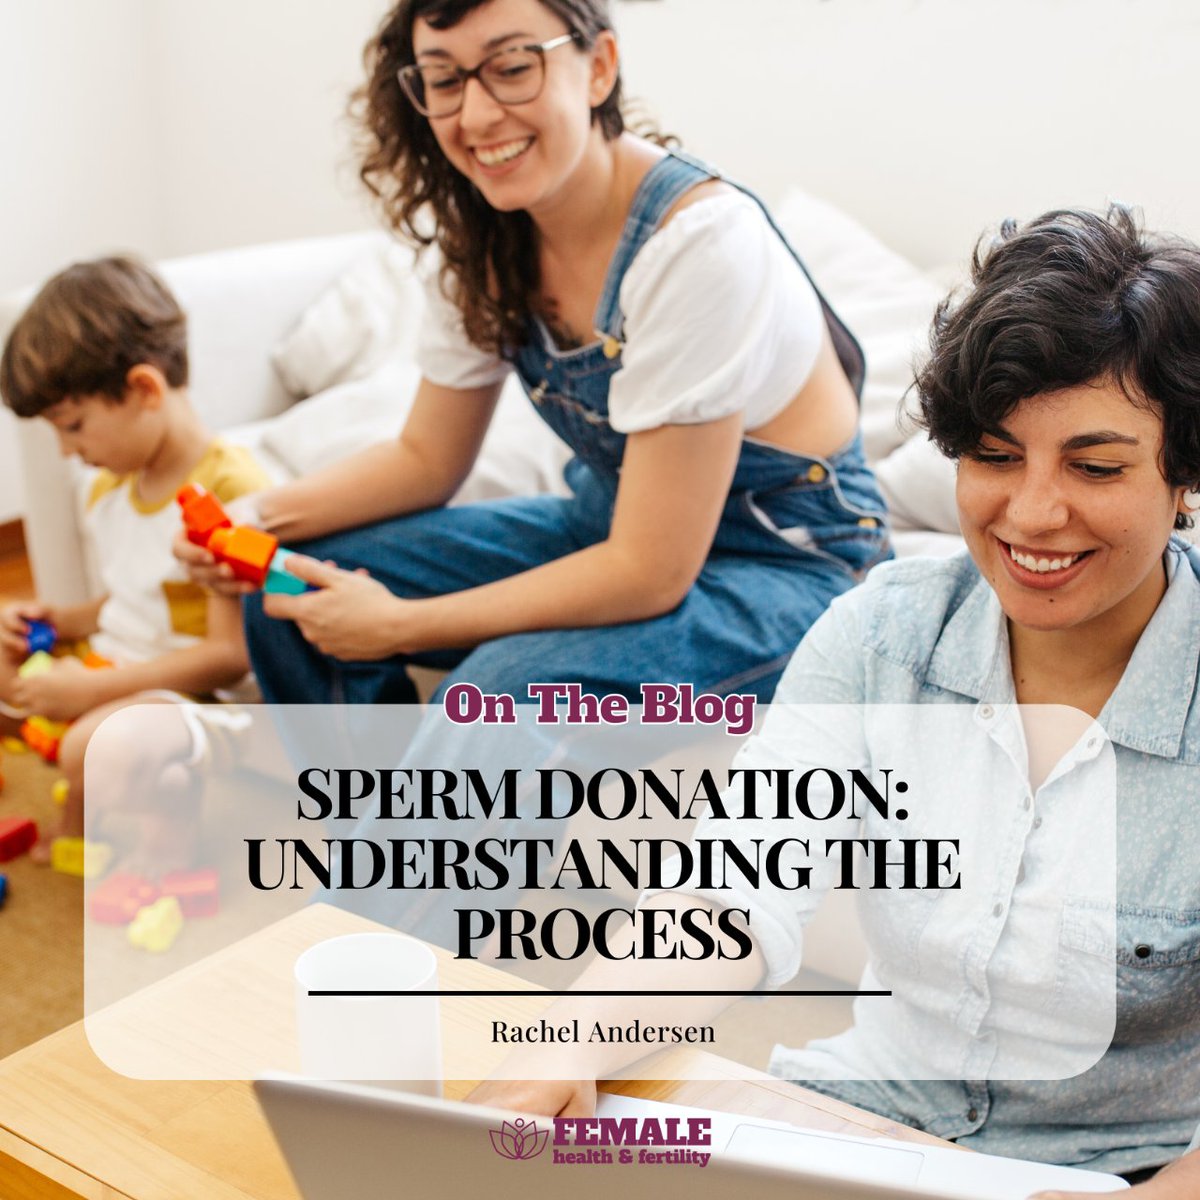 On our blog, Rachel Andersen dives deep into the process of working with a sperm donor to conceive. Read more: femalehealthandfertility.com/sperm-donation…

#fertilityjourney #spermdonation #tryingtoconceive #pridemonth